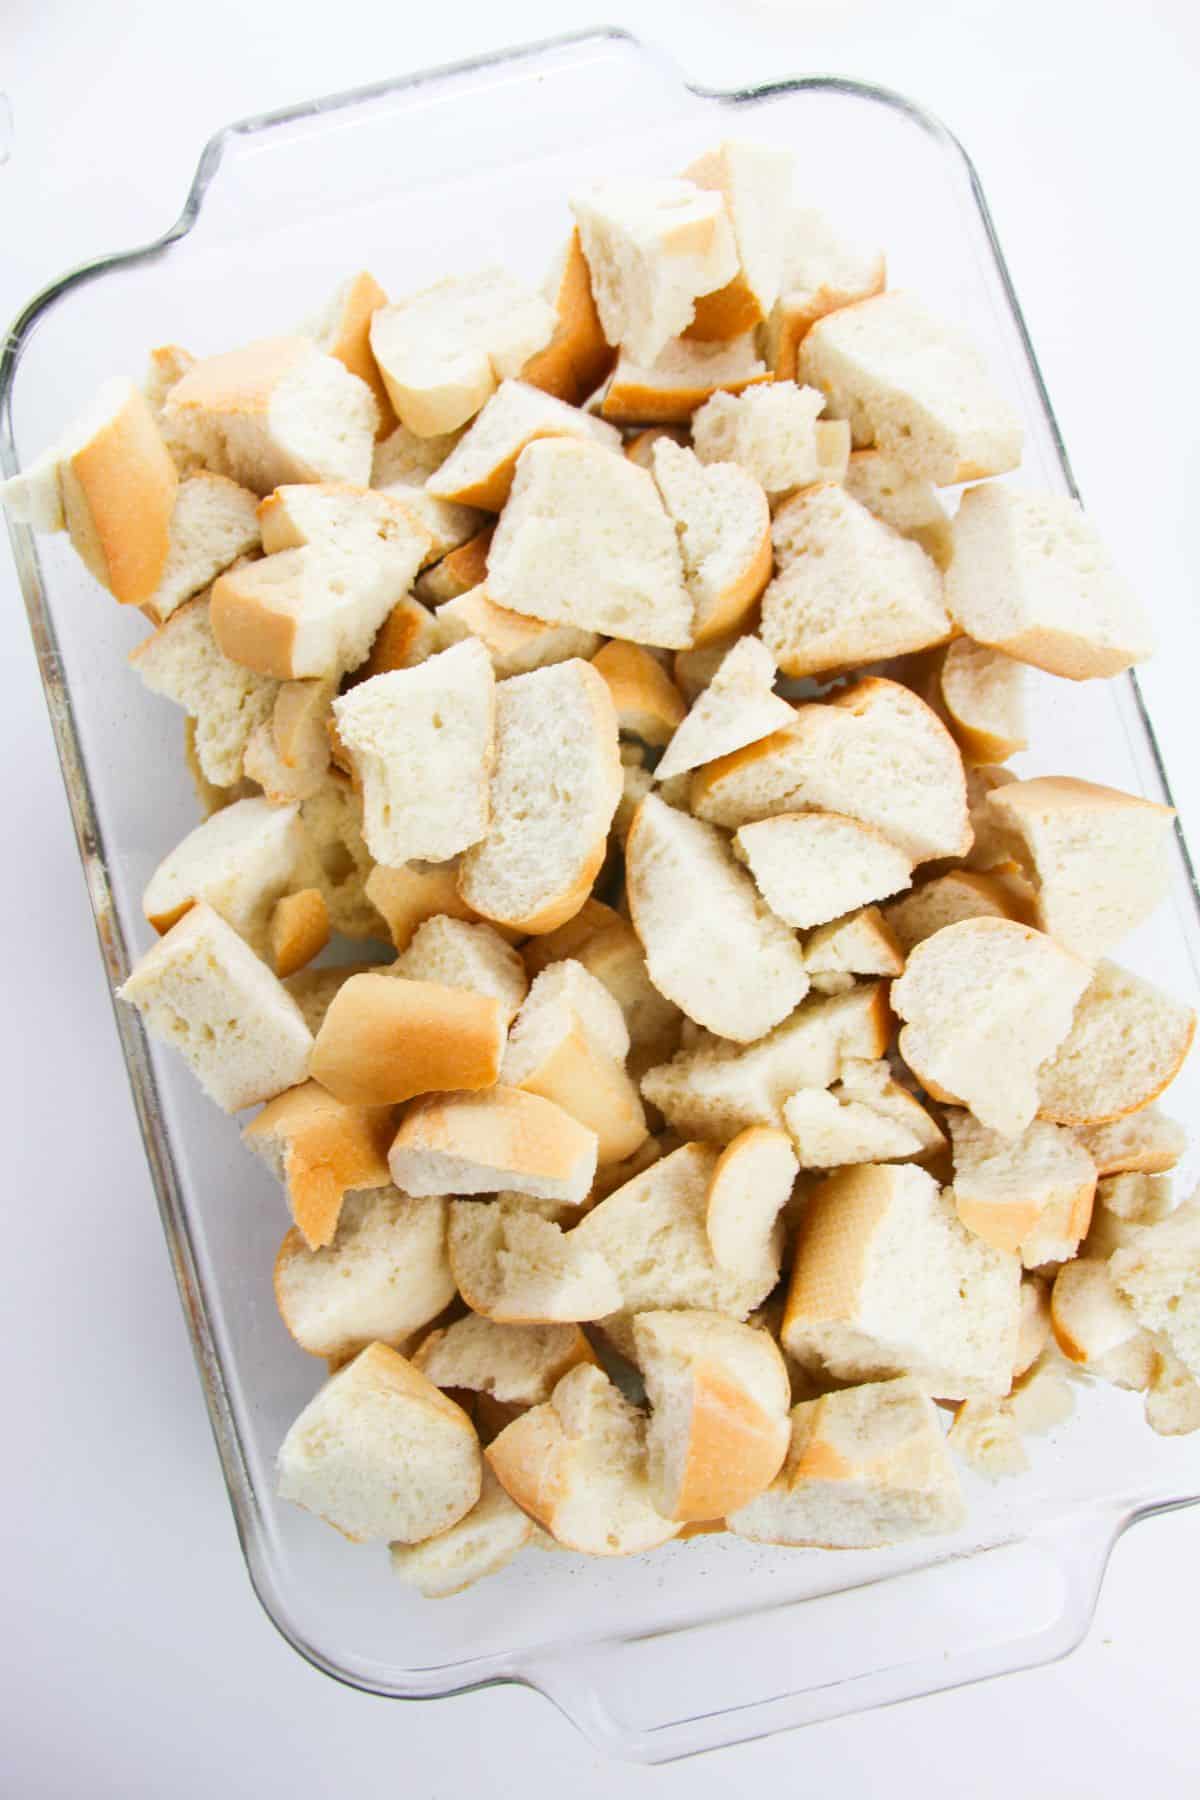 Bread cubes in a glass baking dish.